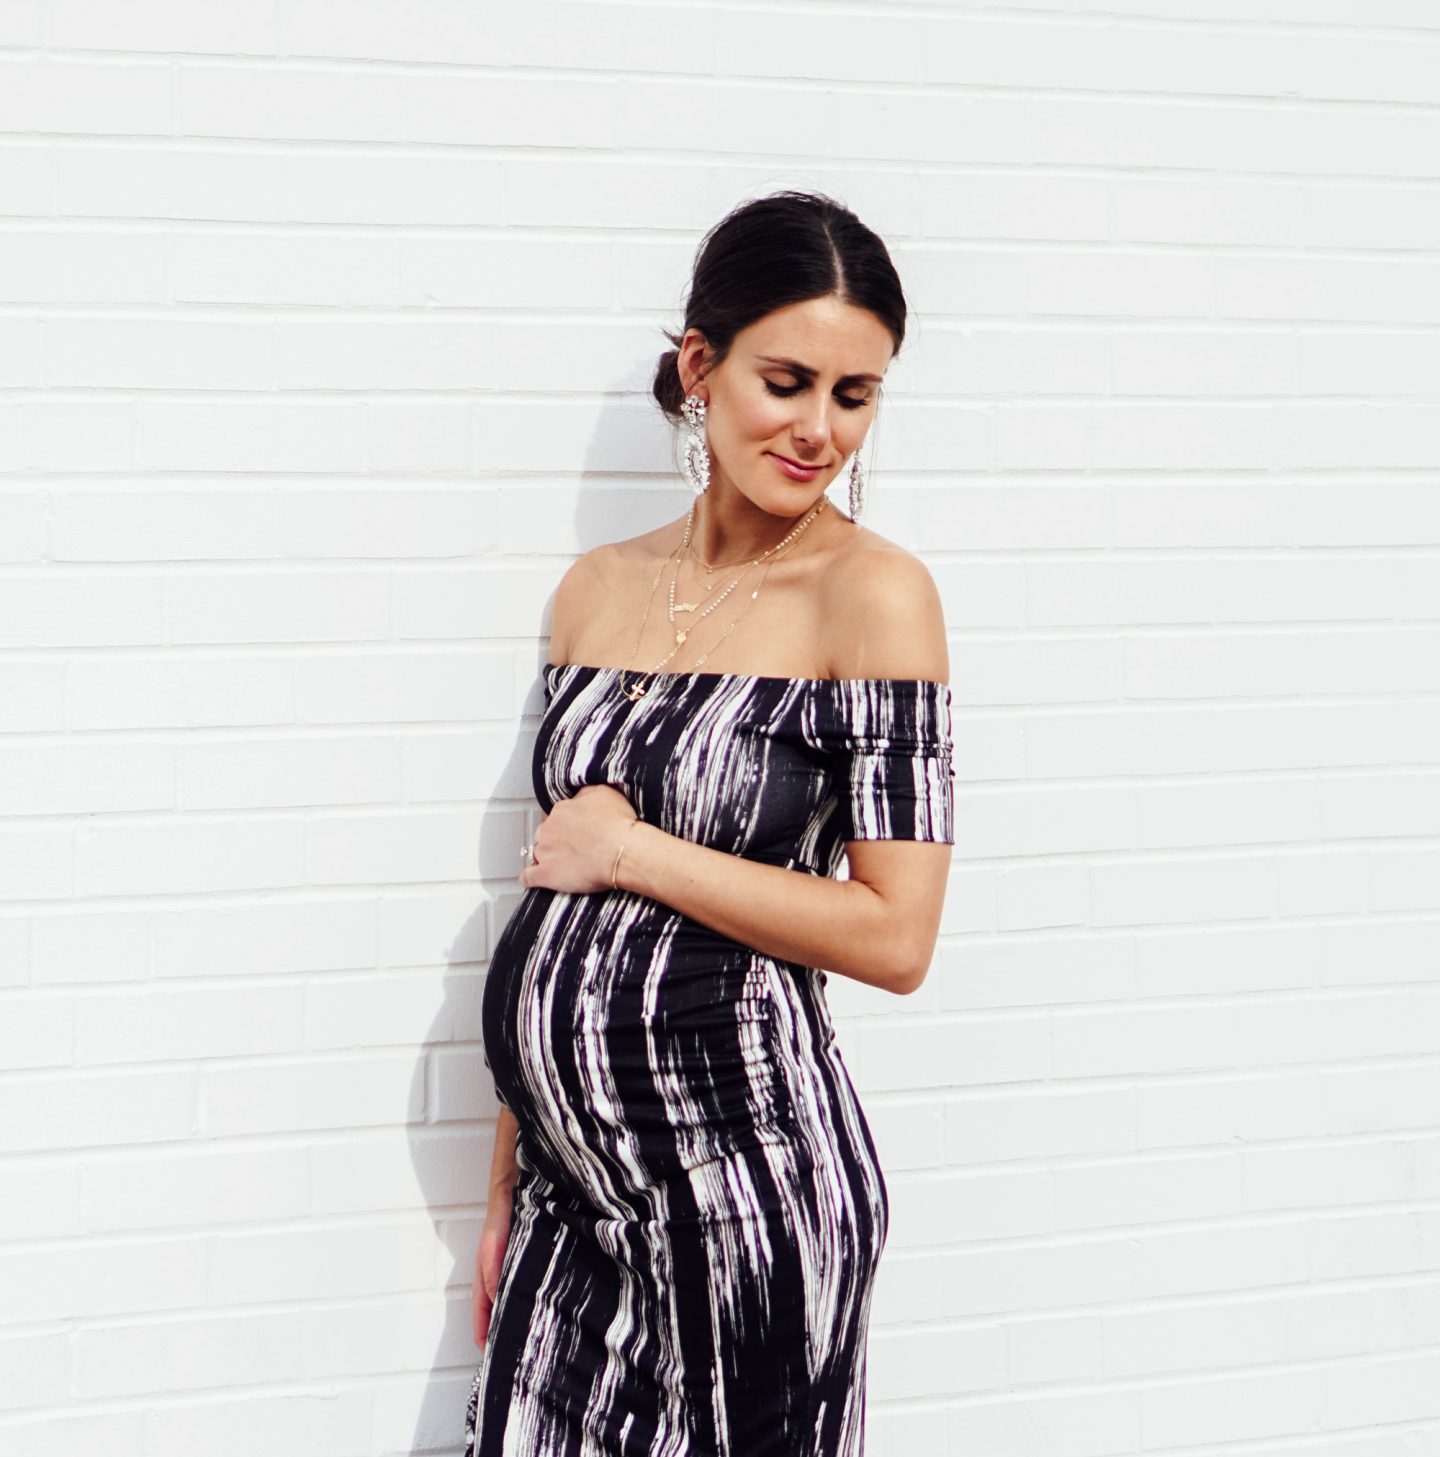 I'm sharing this super-flattering fitted maternity dress on TheDandyLiar.com, along with 32 things about me in honor of my 32nd birthday! Don't miss the $700 Nordstrom giveaway at the end!